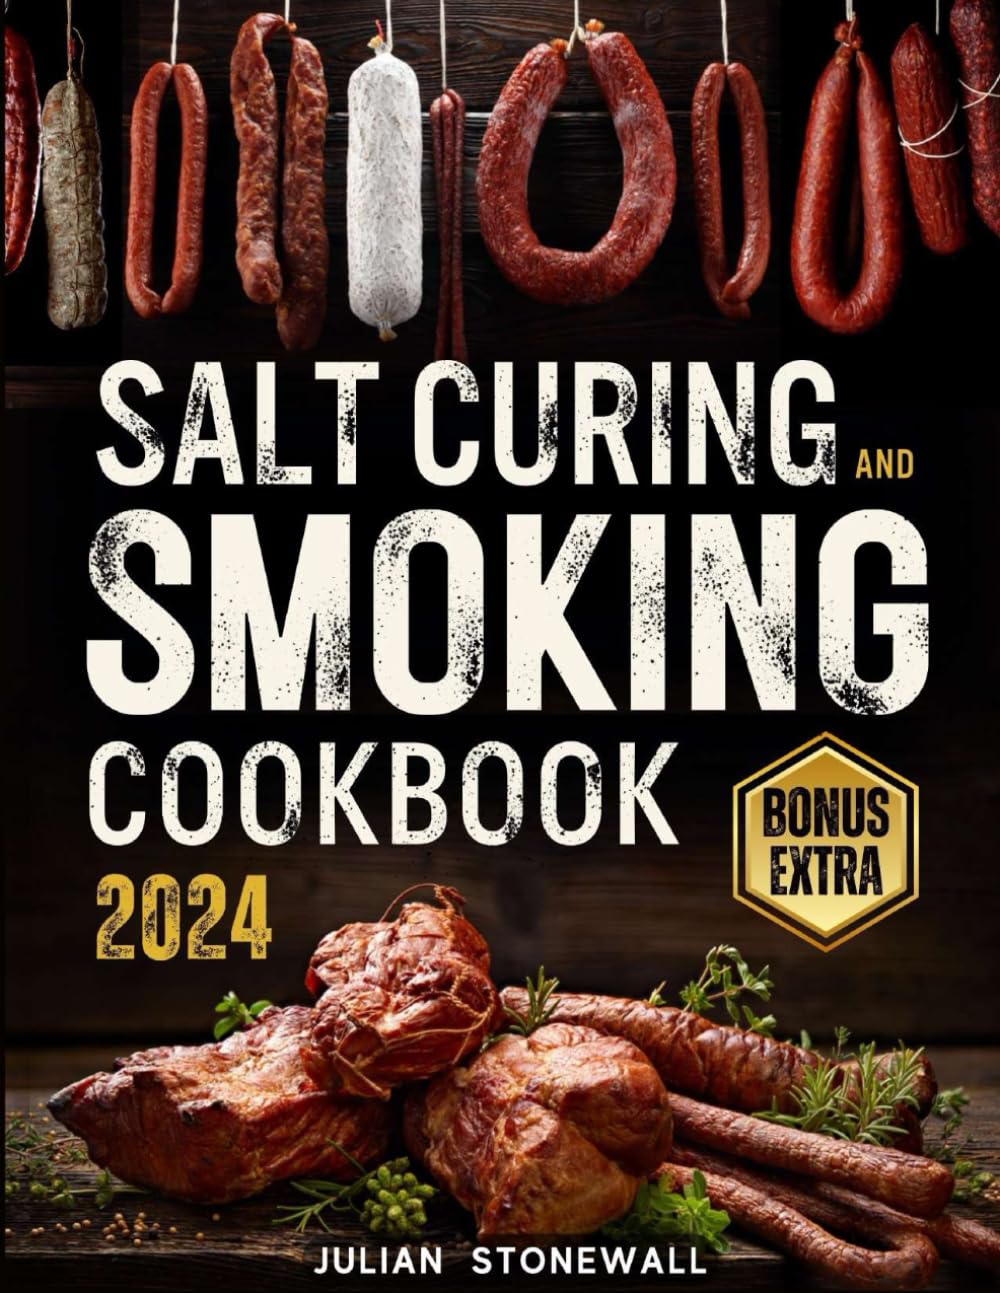 Salt Curing & Smoking Cookbook: The Bible • Master The Art of Safely Preserving Your Meat, Fish, and Game with Time-Tested Techniques and 180+ Easy, Succulent Recipes Ready to Taste All Year Round